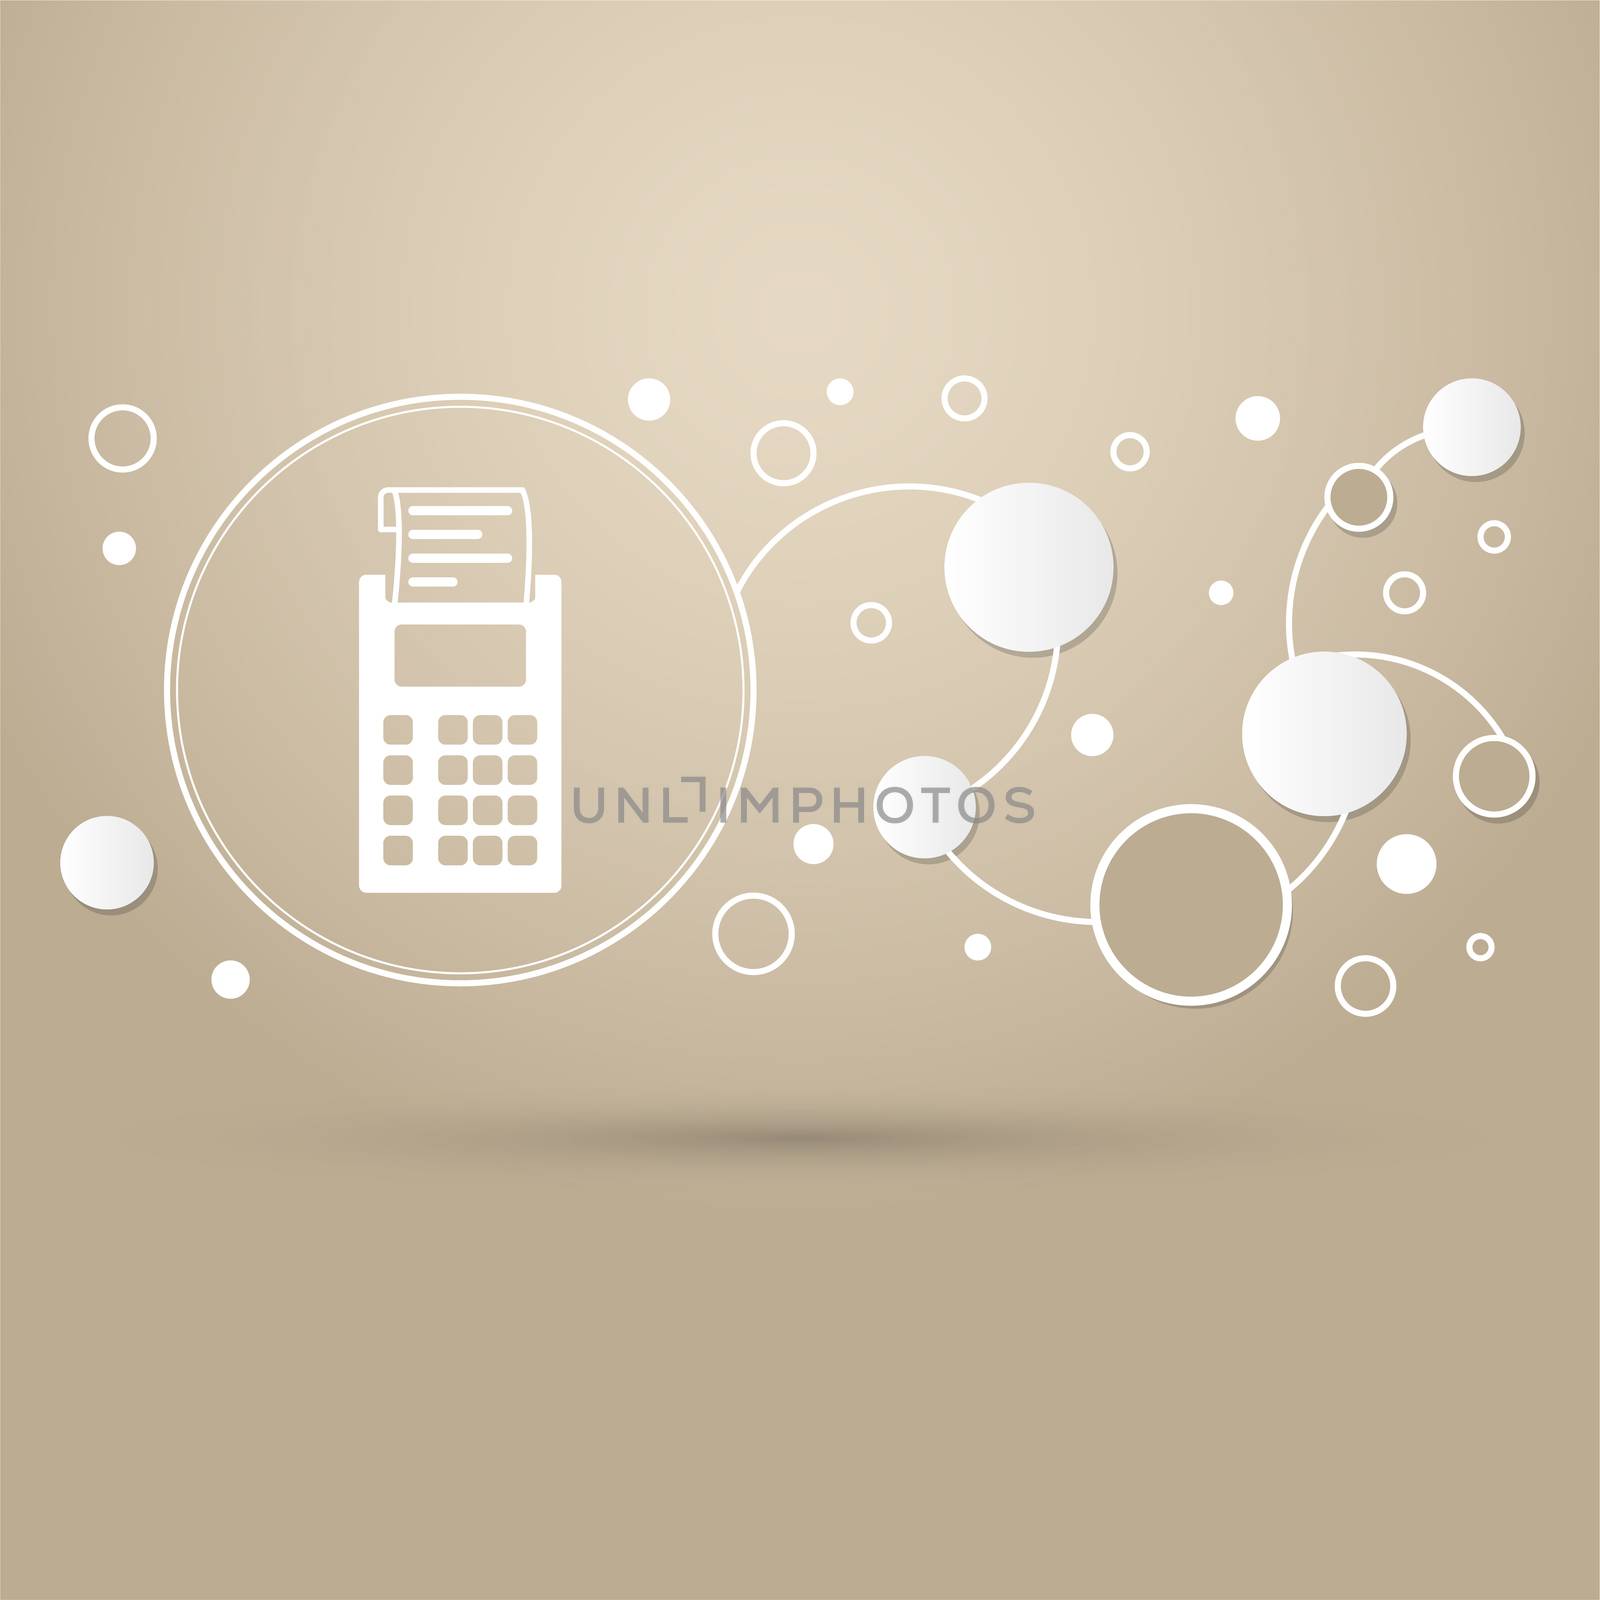 calculator icon on a brown background with elegant style and modern design infographic.  by Adamchuk